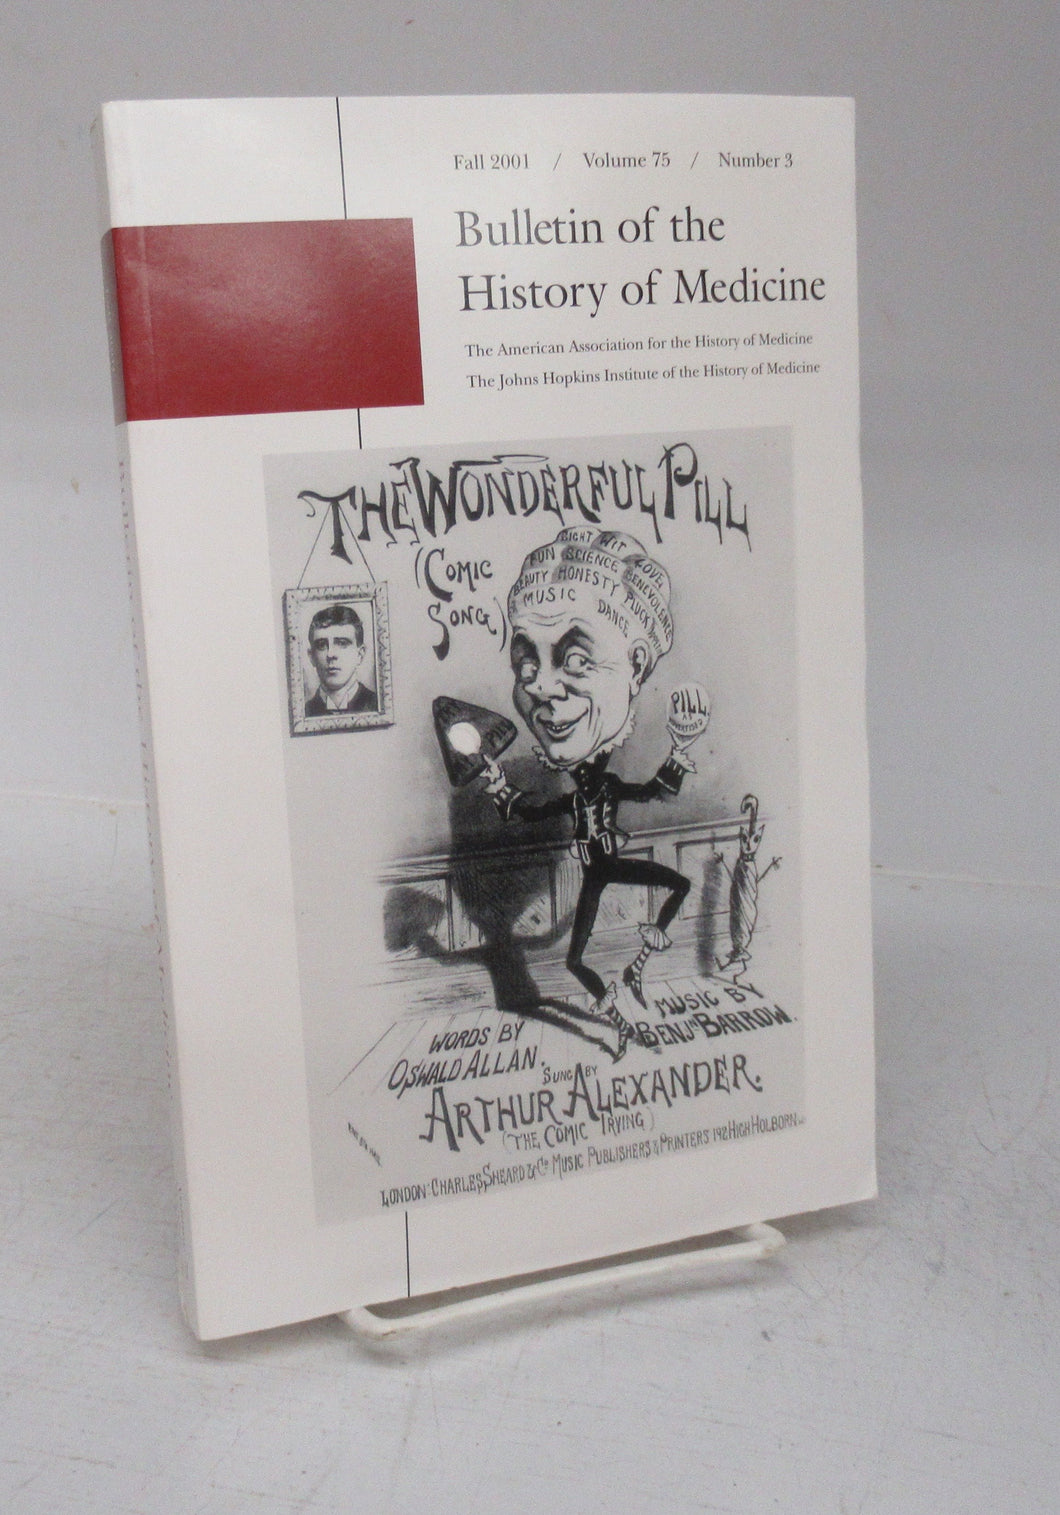 Bulletin of the History of Medicine Fall 2001